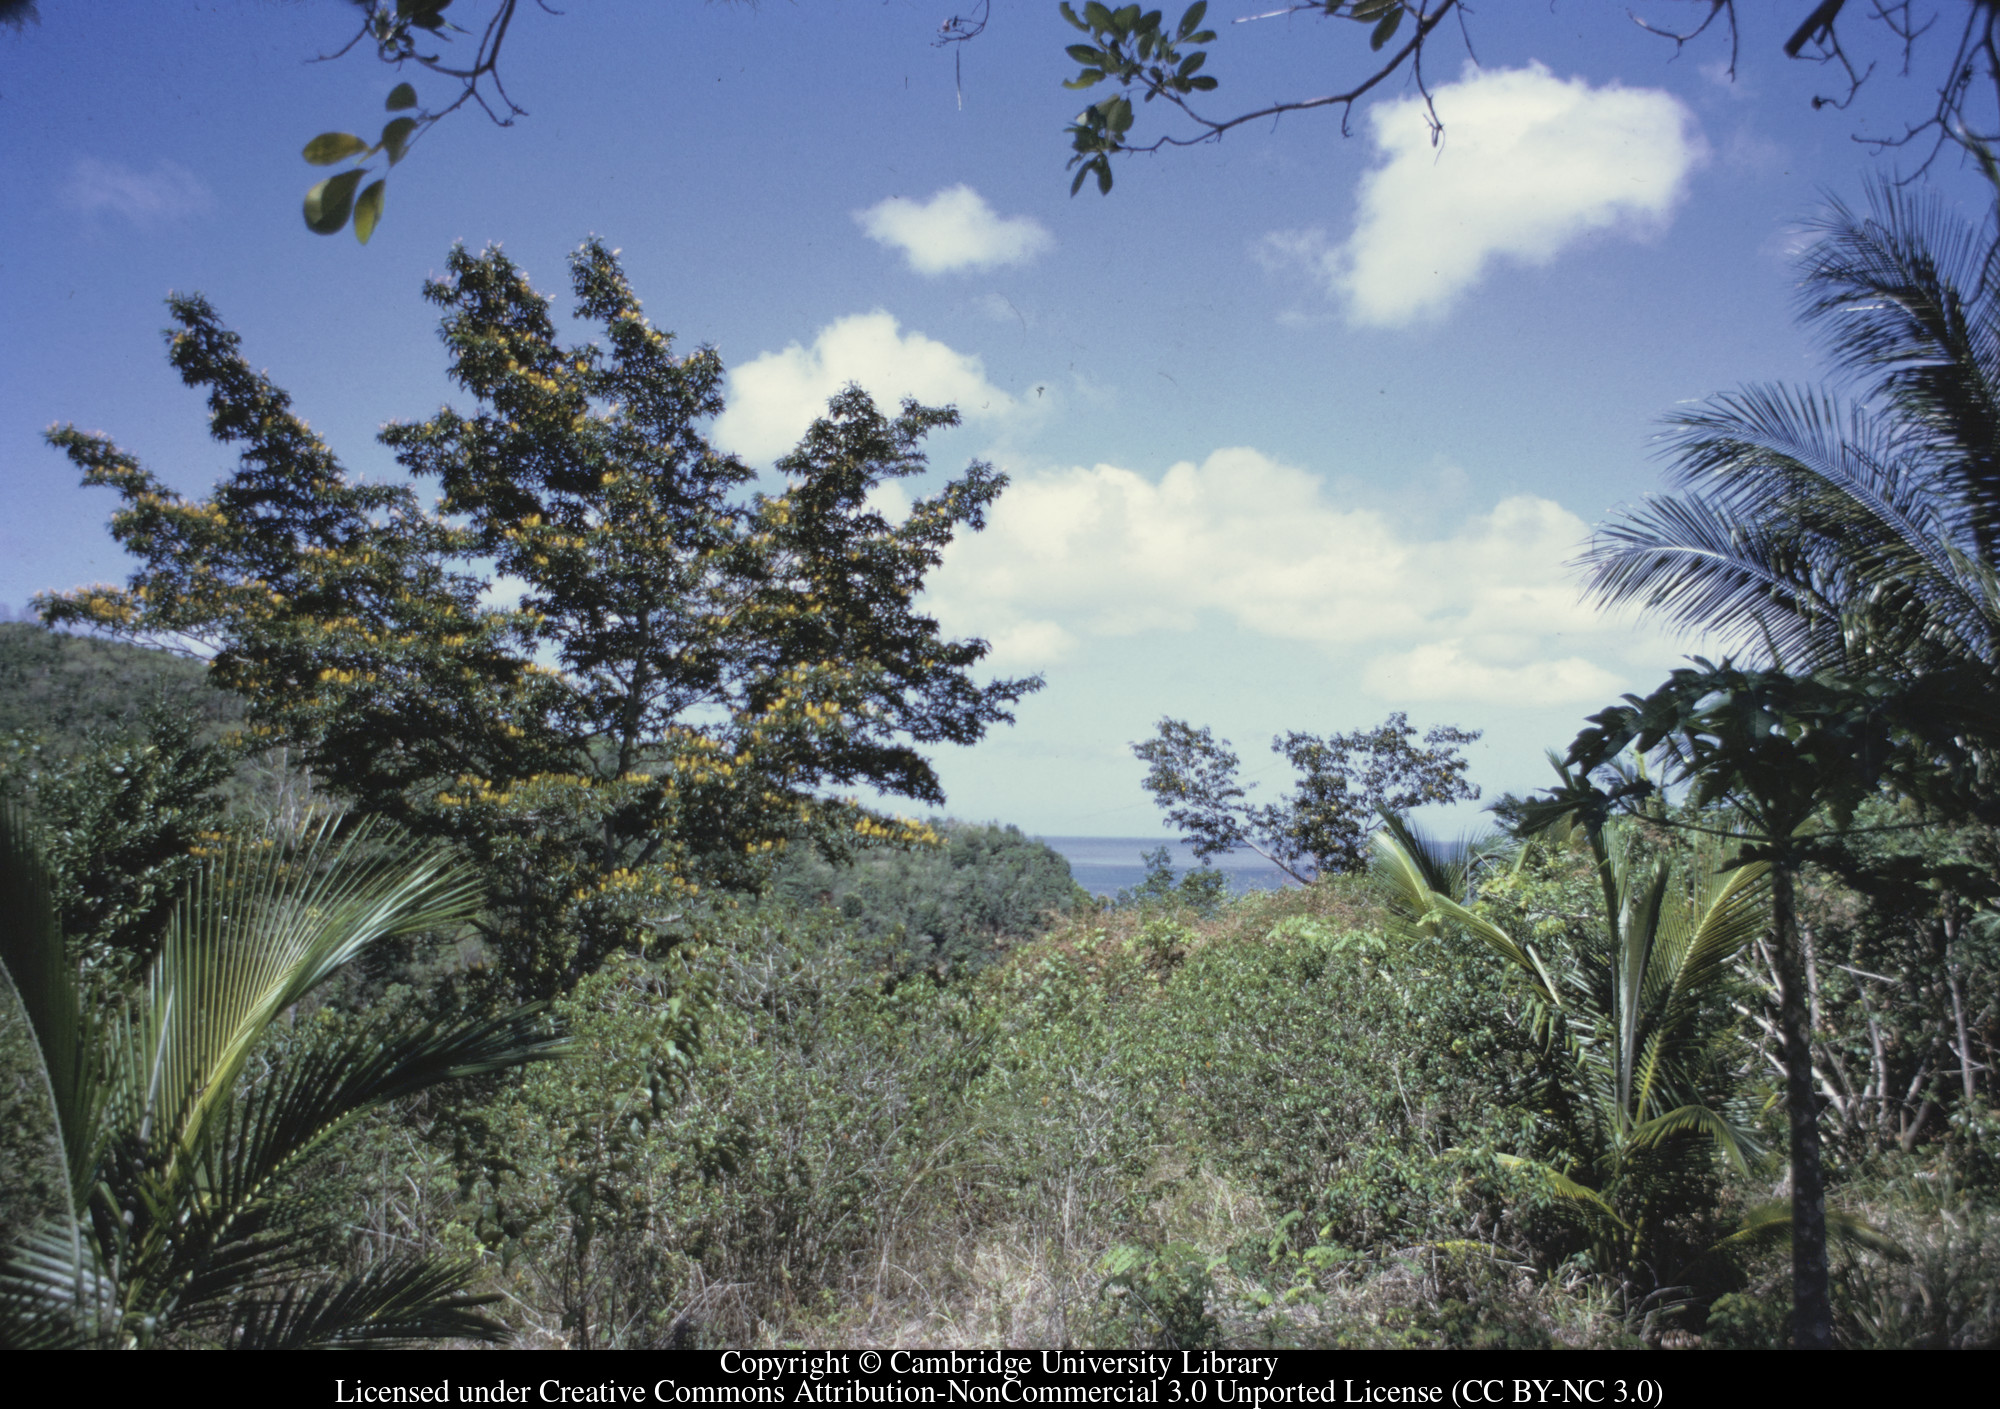 C [Ciceron] : view from approach, 1971-06